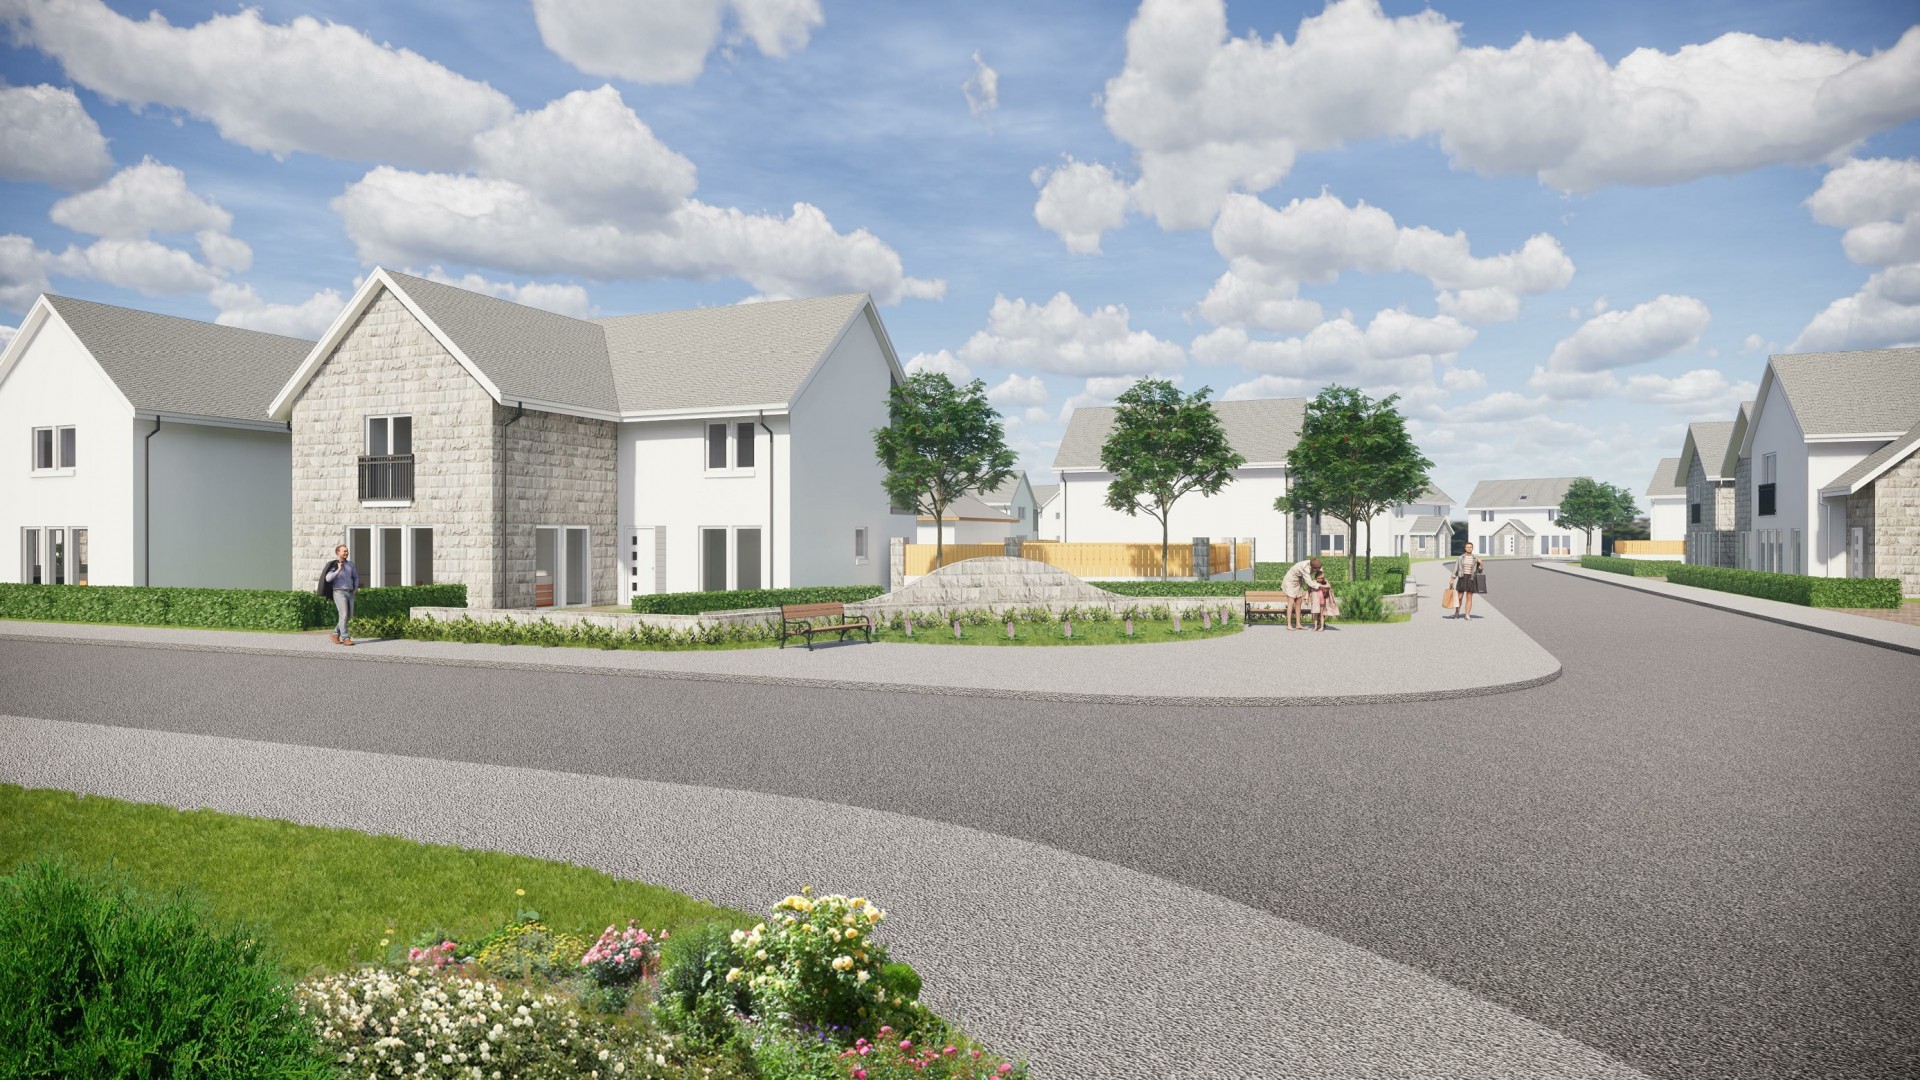 Bancon Homes moves south with plans for 37 new homes South Lanarkshire